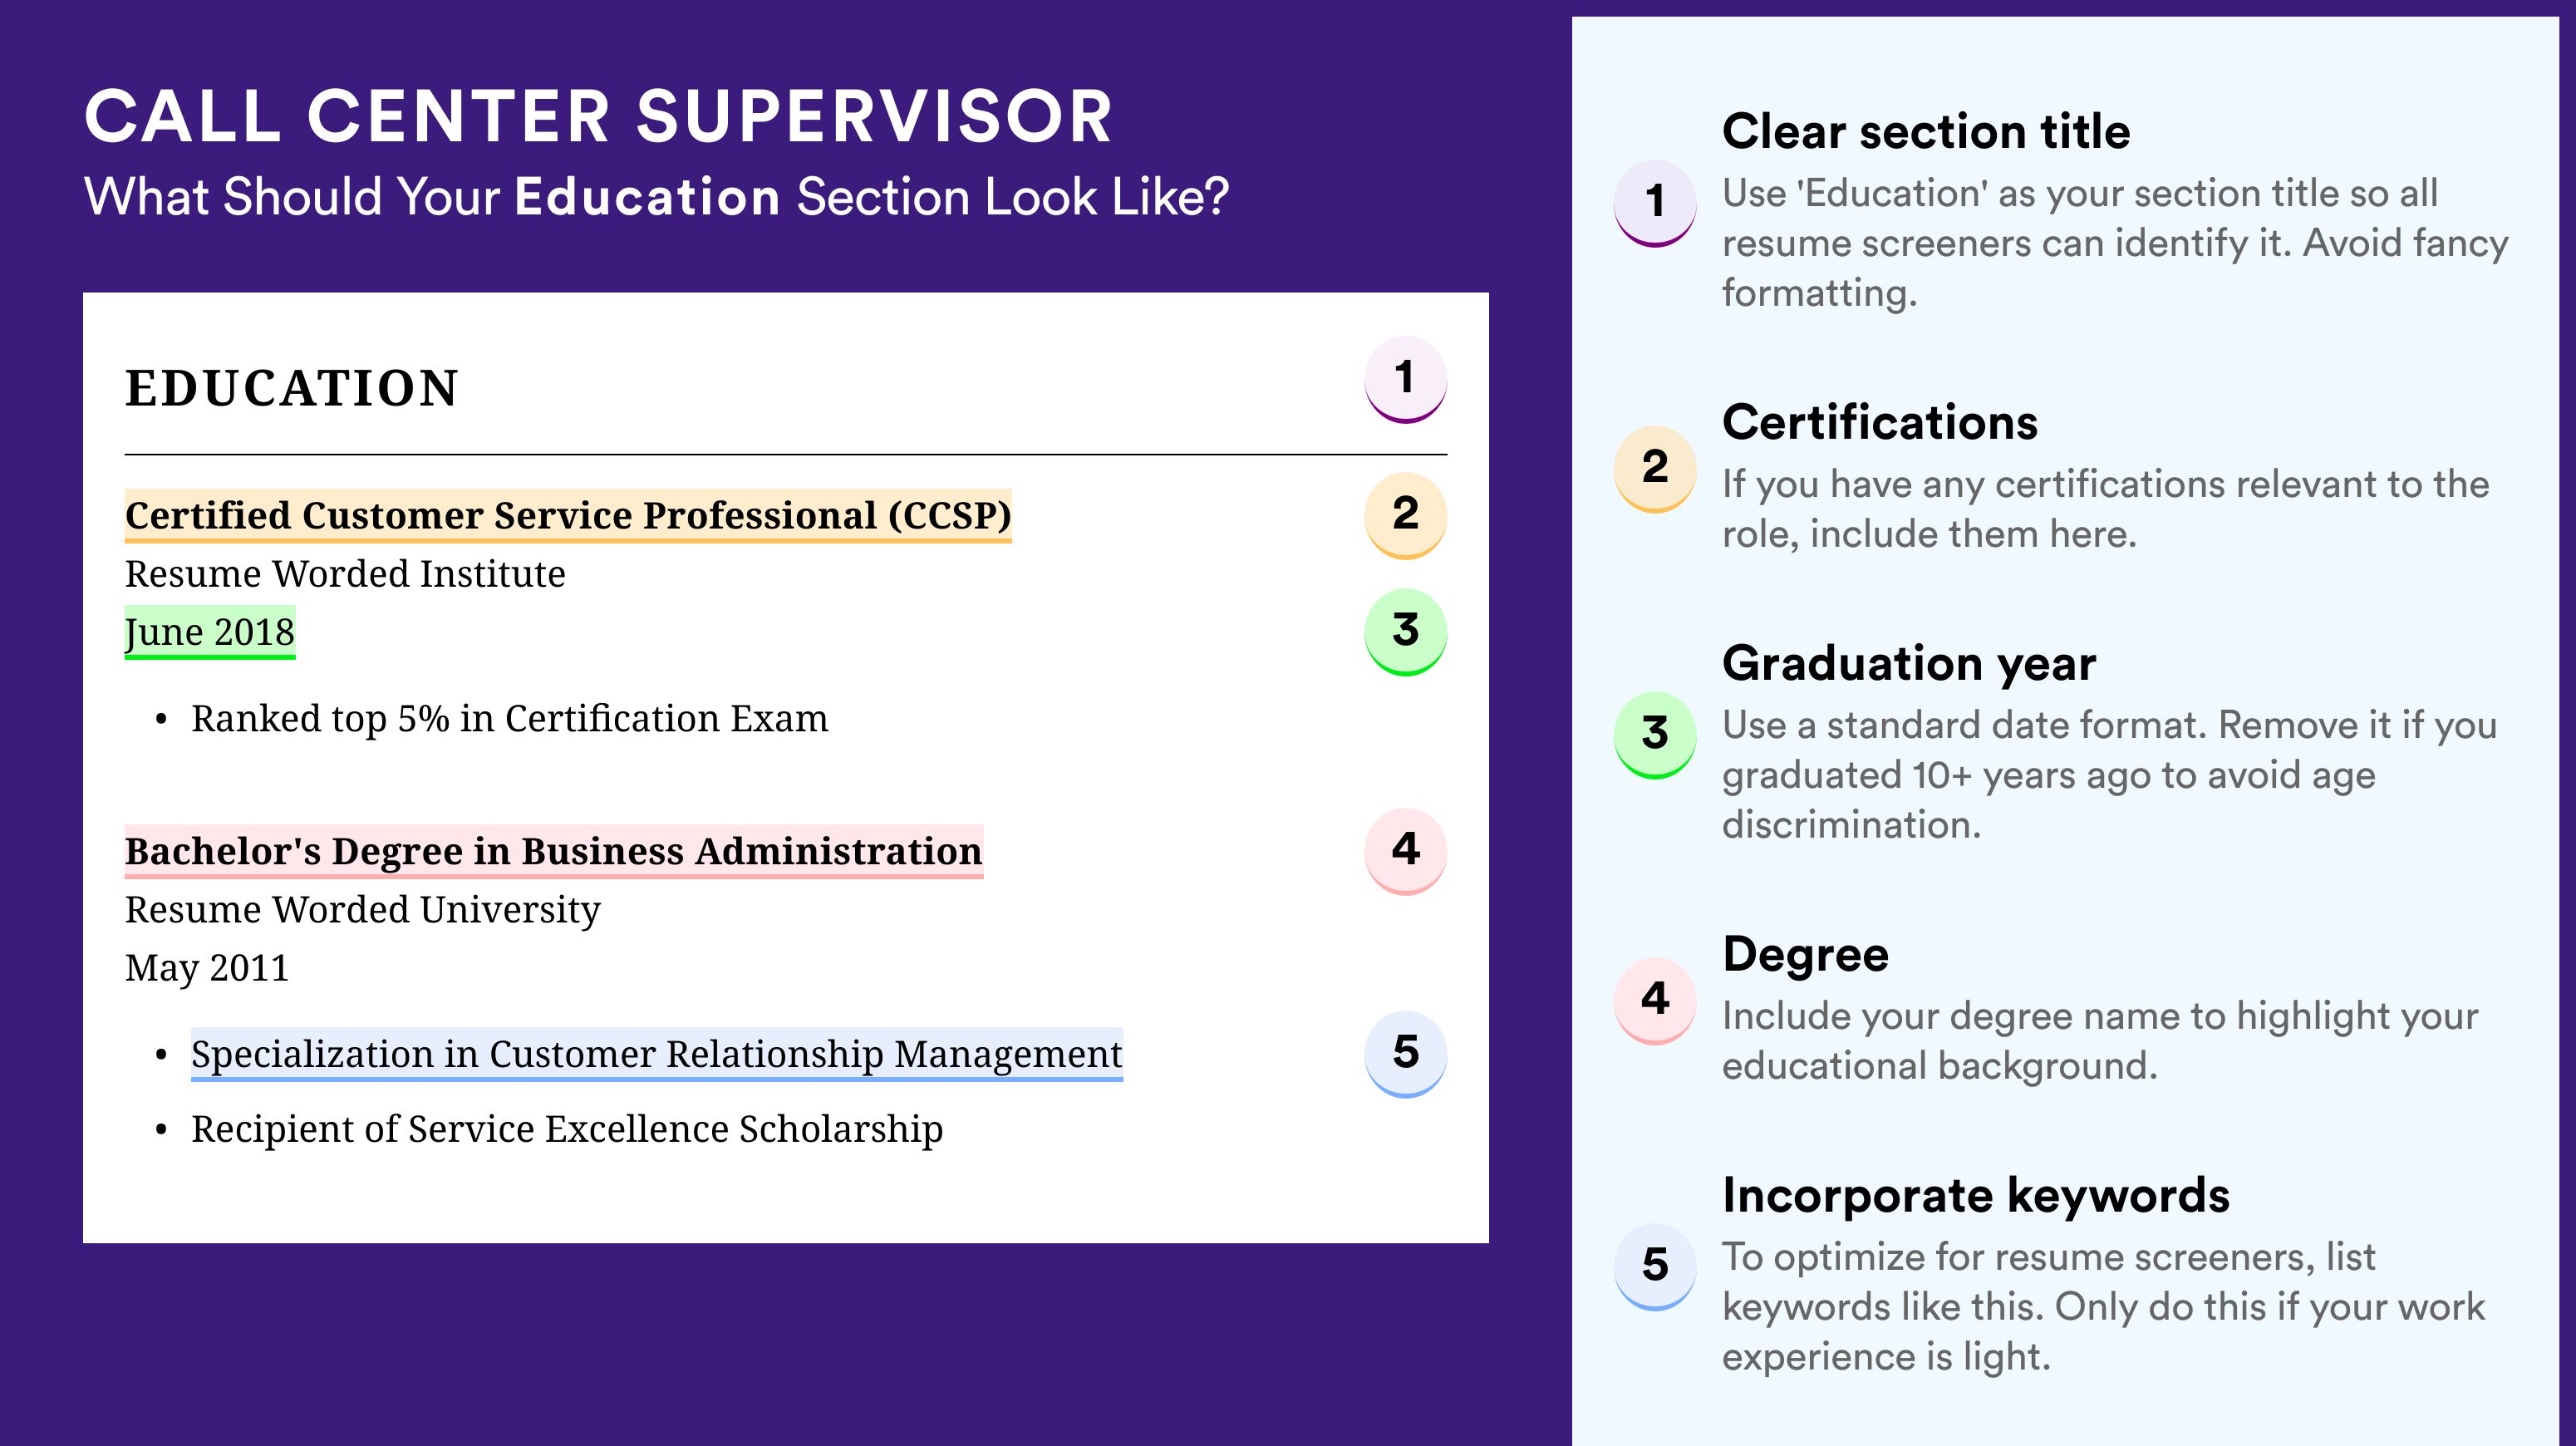 How To Write An Education Section - Call Center Supervisor Roles